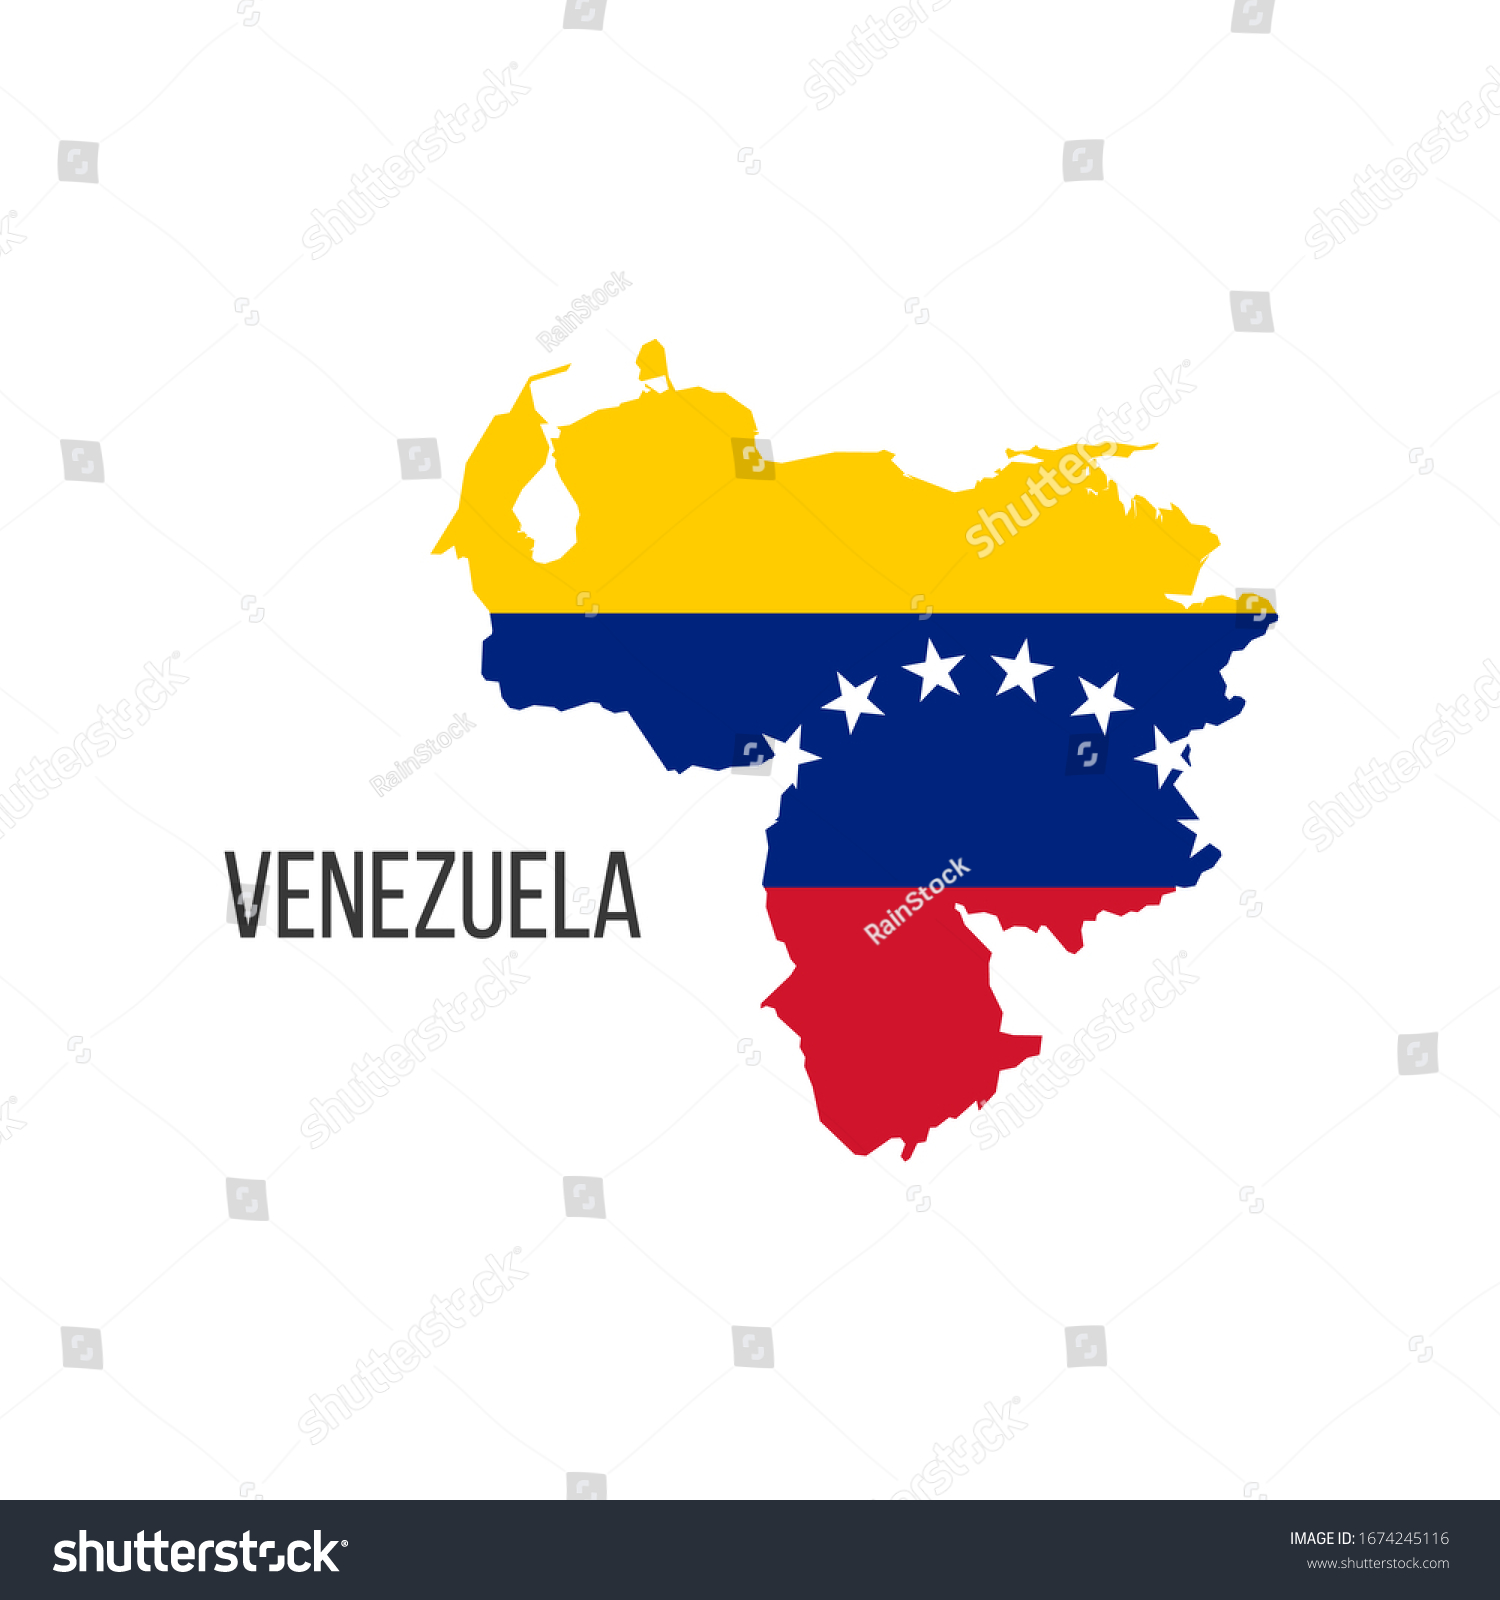 Stock Vector Venezuela Flag Map The Flag Of The Country In The Form Of Borders Stock Vector Illustration 1674245116 